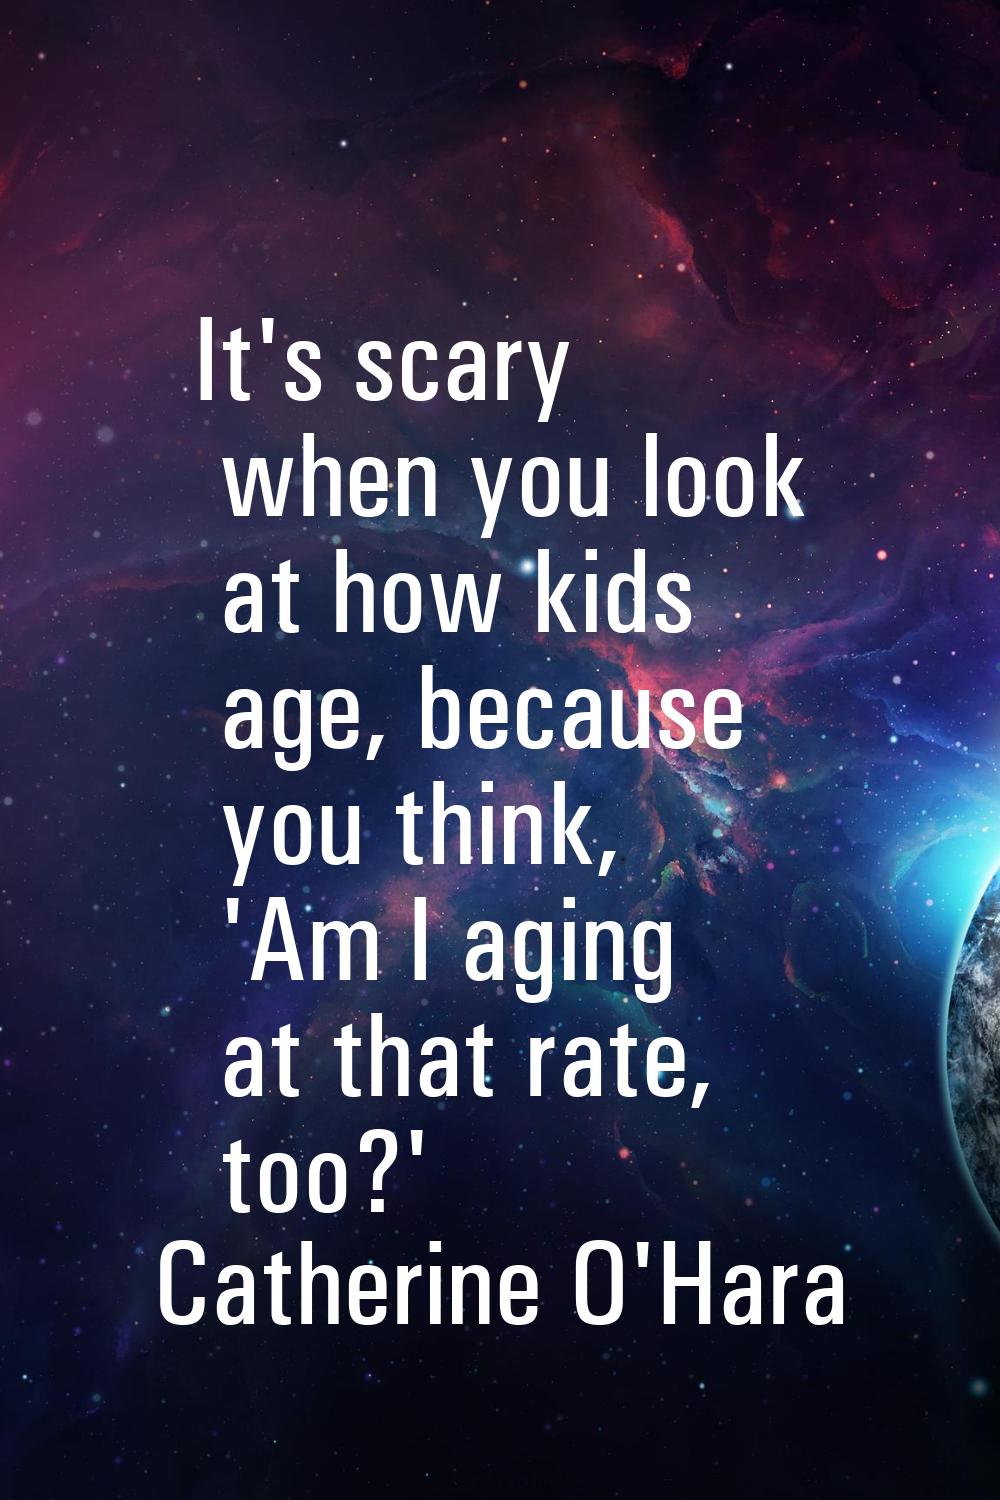 It's scary when you look at how kids age, because you think, 'Am I aging at that rate, too?'